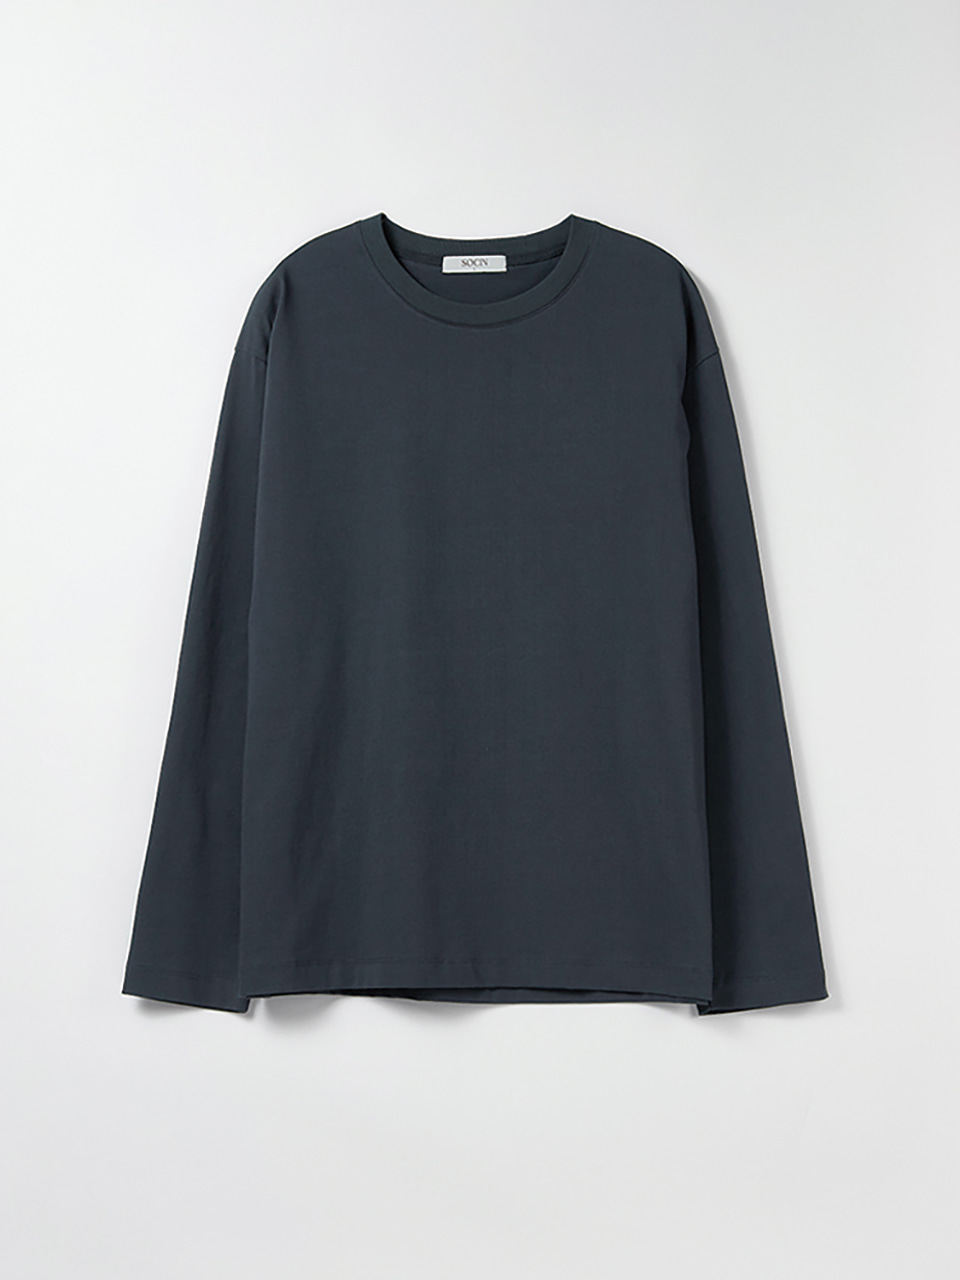 Essential Long Sleeve T-shirt (Charcoal)